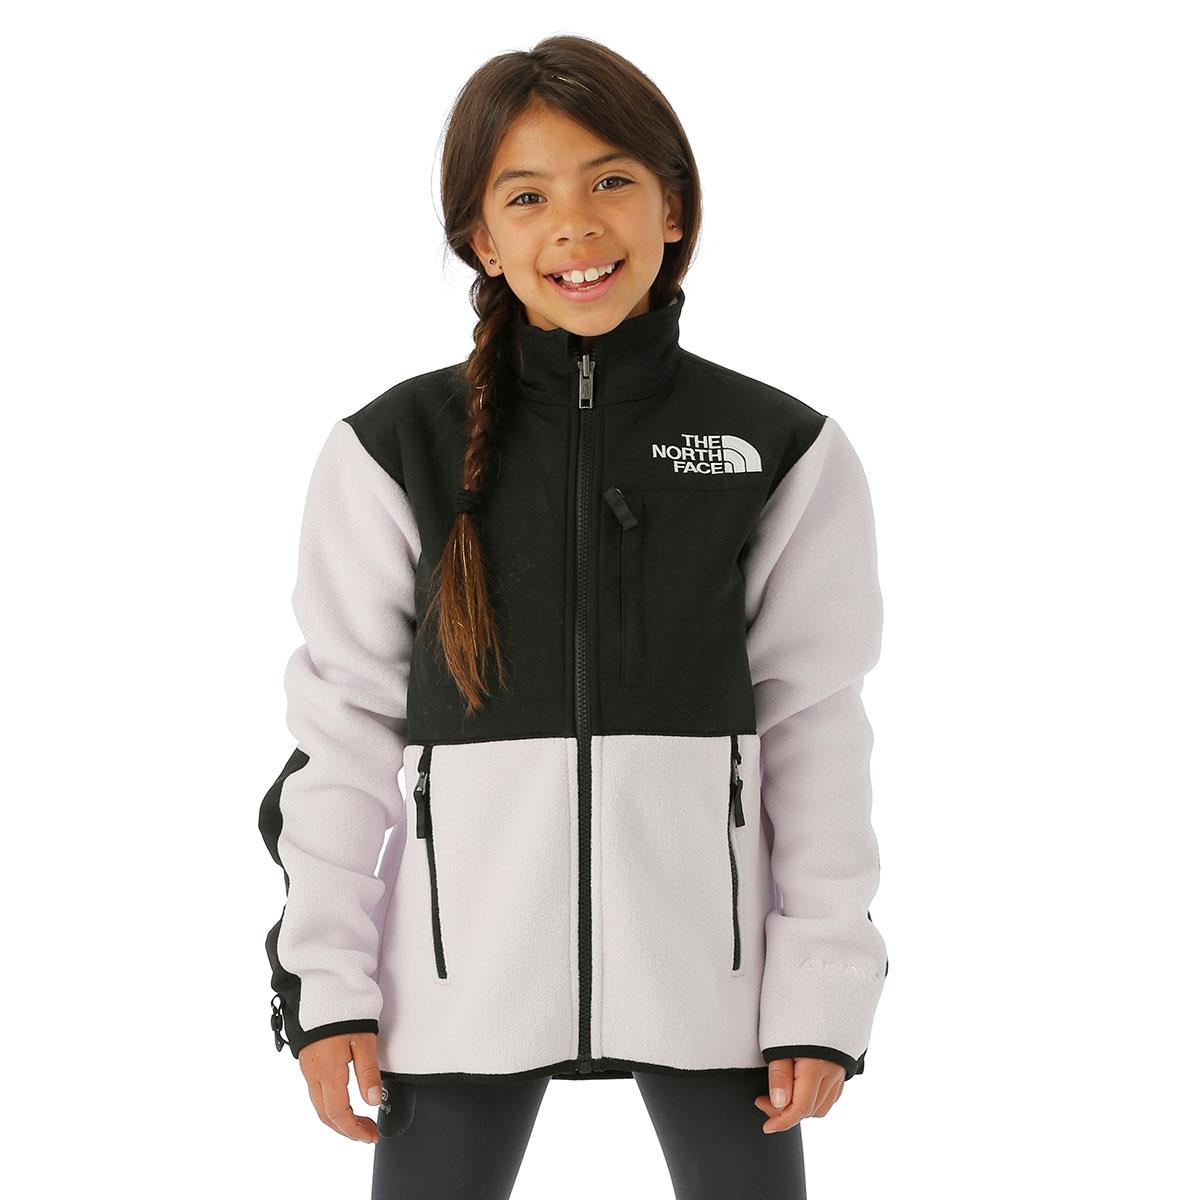 The north face denali youth/L